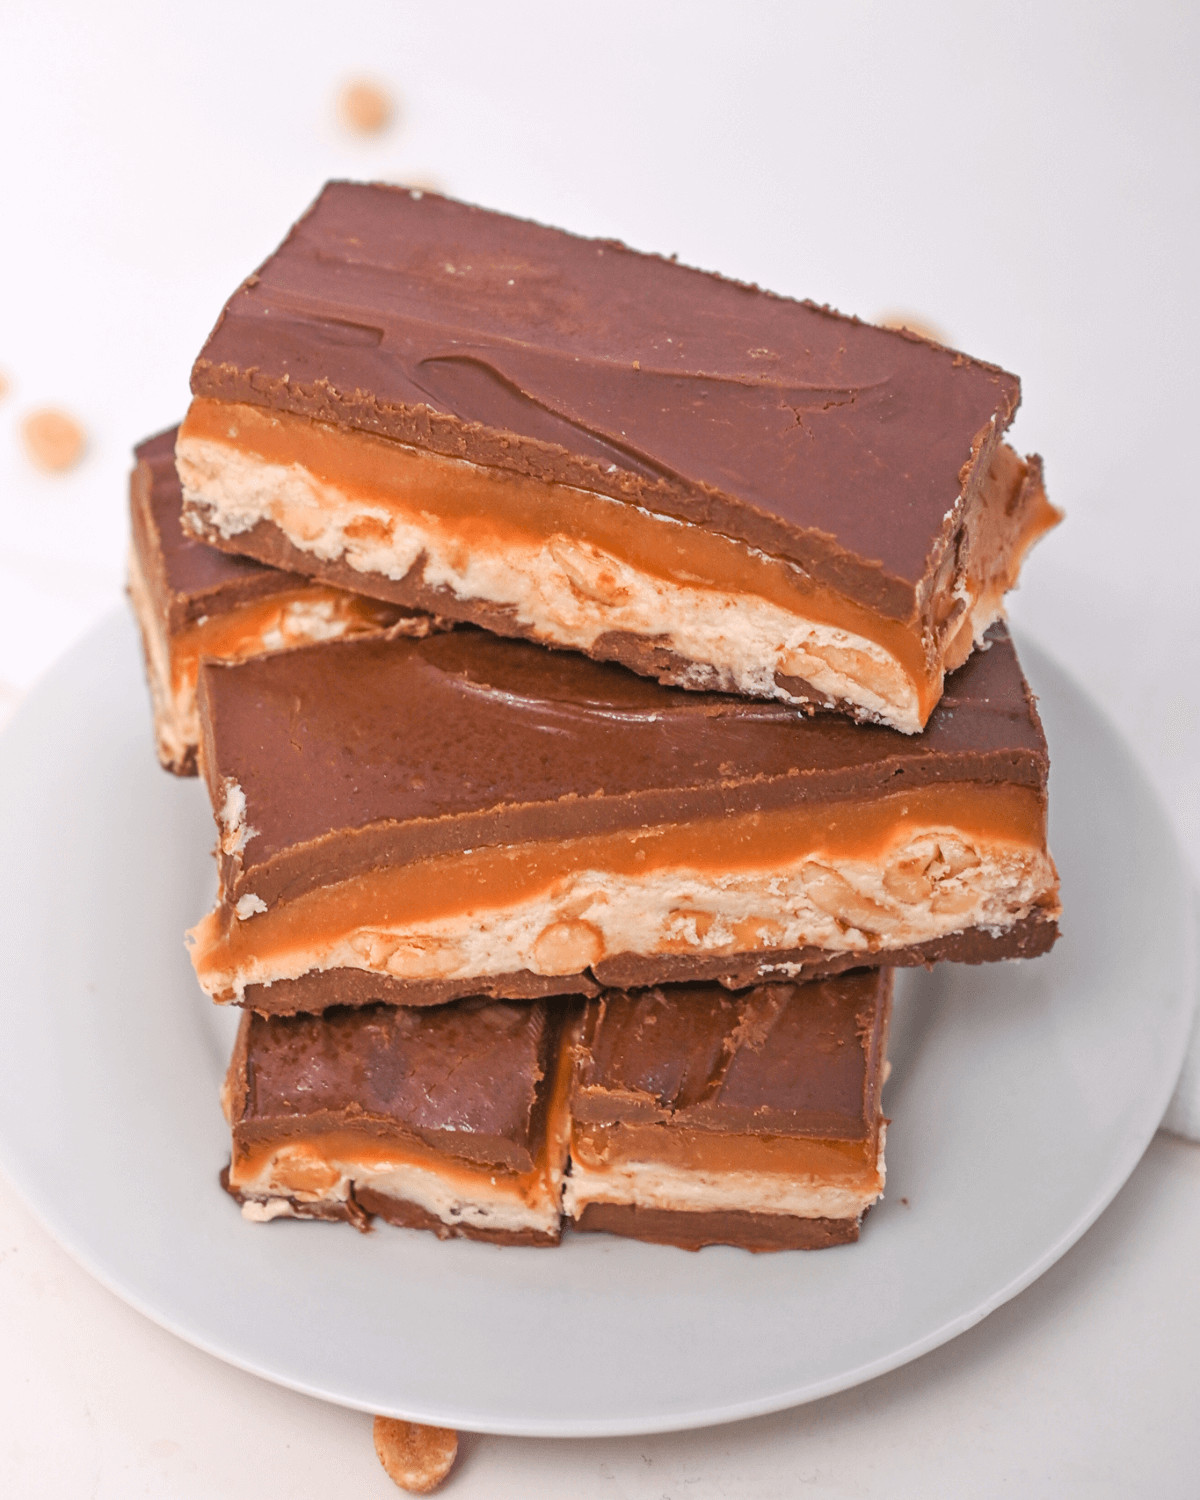 A snack of the homemade snicker bars.